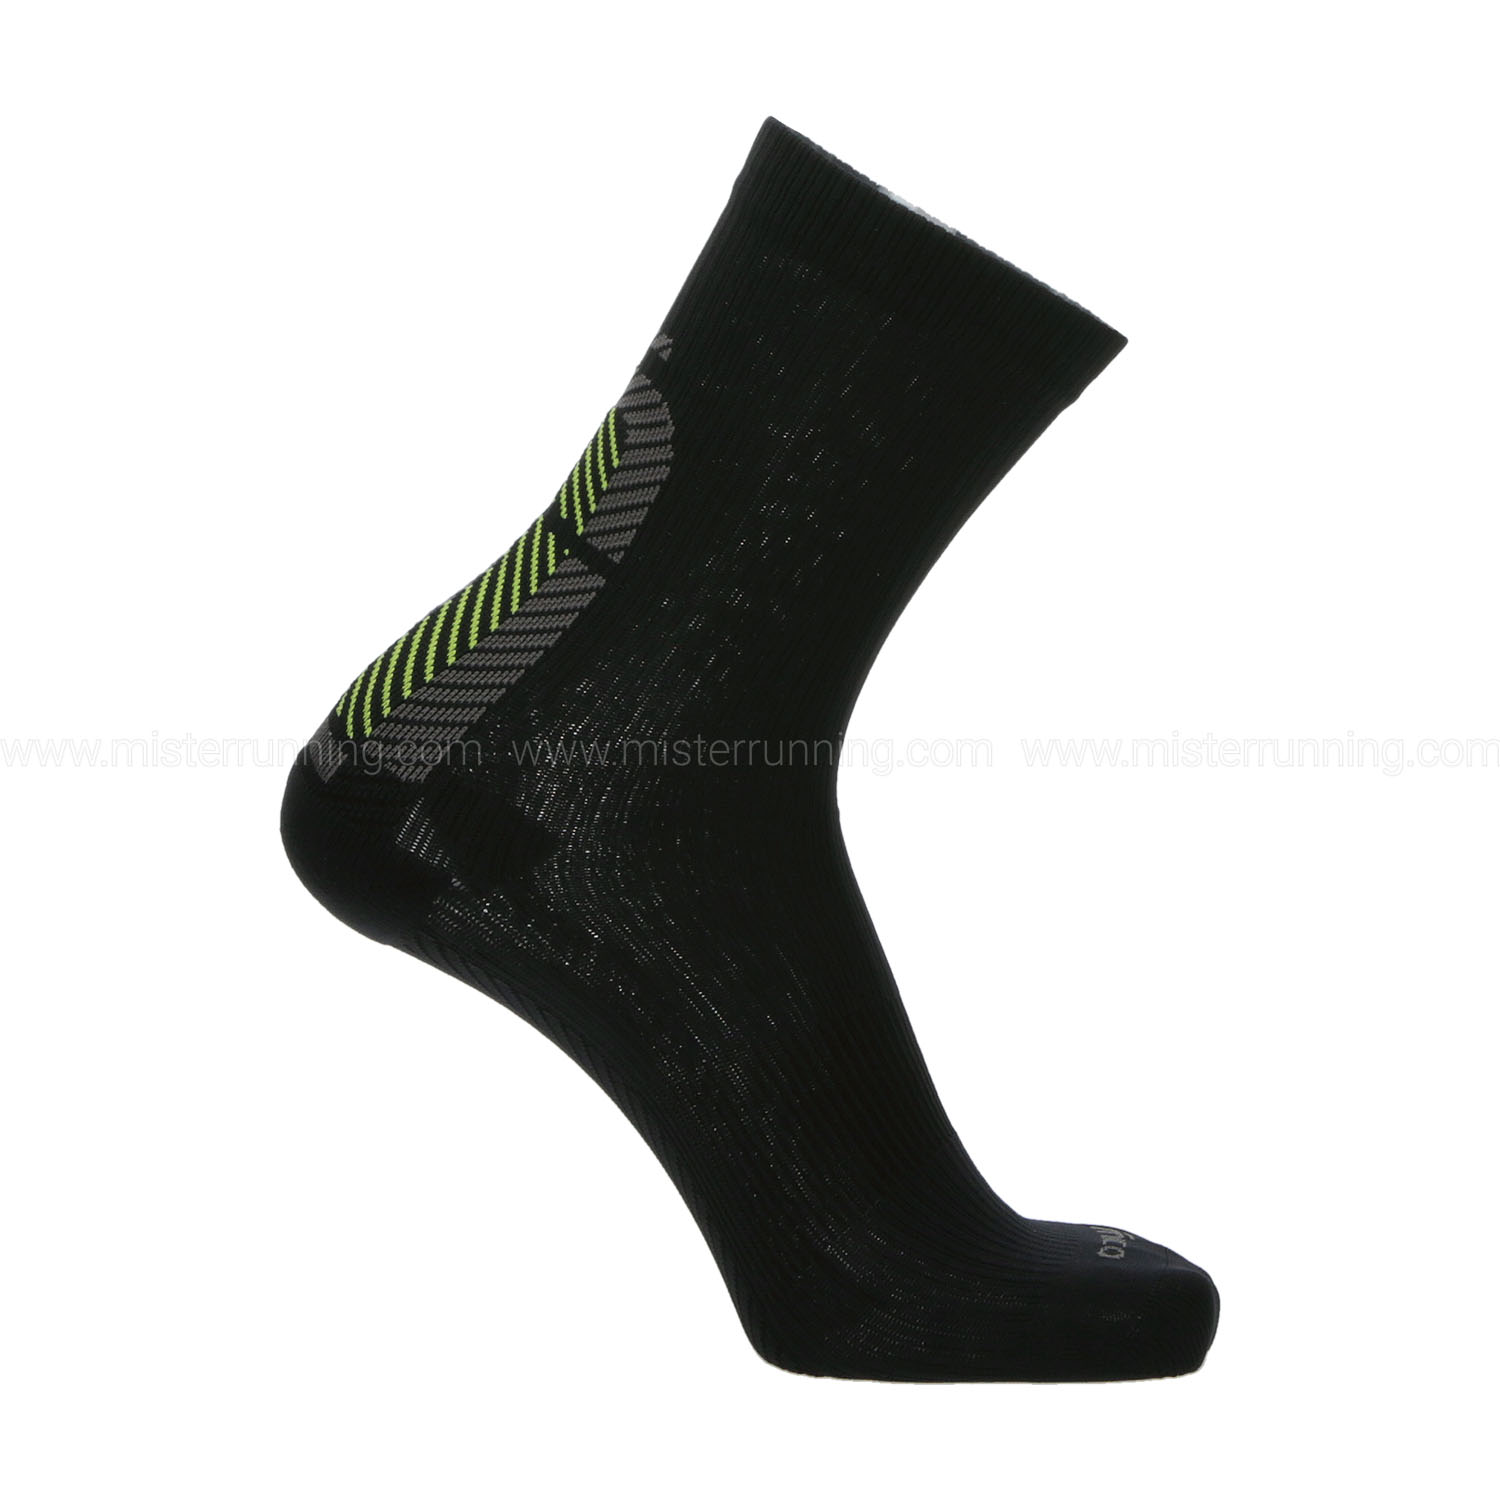 Mico Pro X-Performance Light Weight Calcetines - Nero/Giallo Fluo